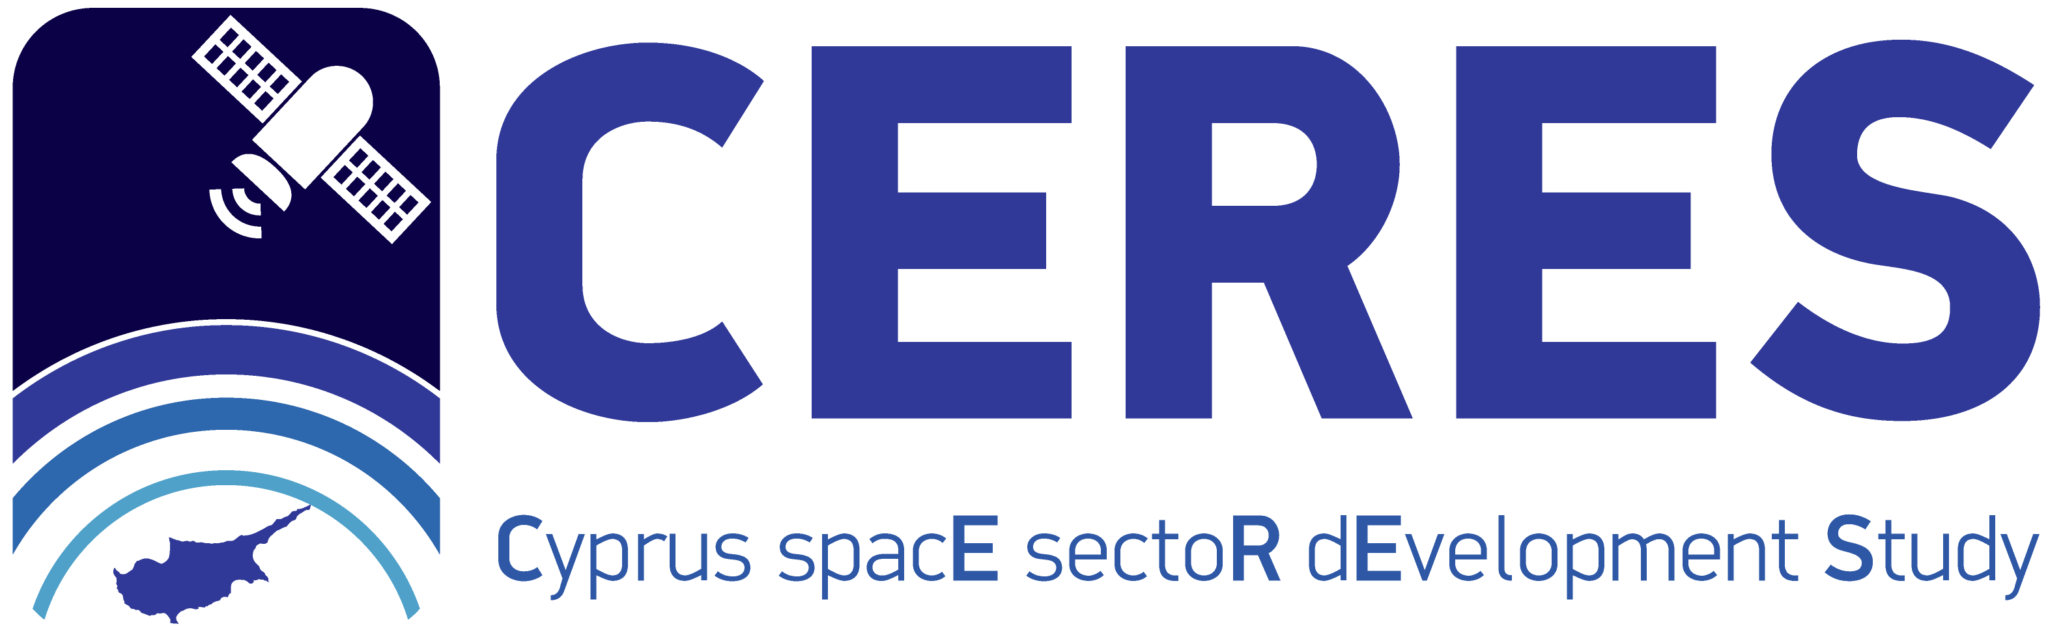 The European Space Agency (ESA) has contracted EMTech Cyprus and ...